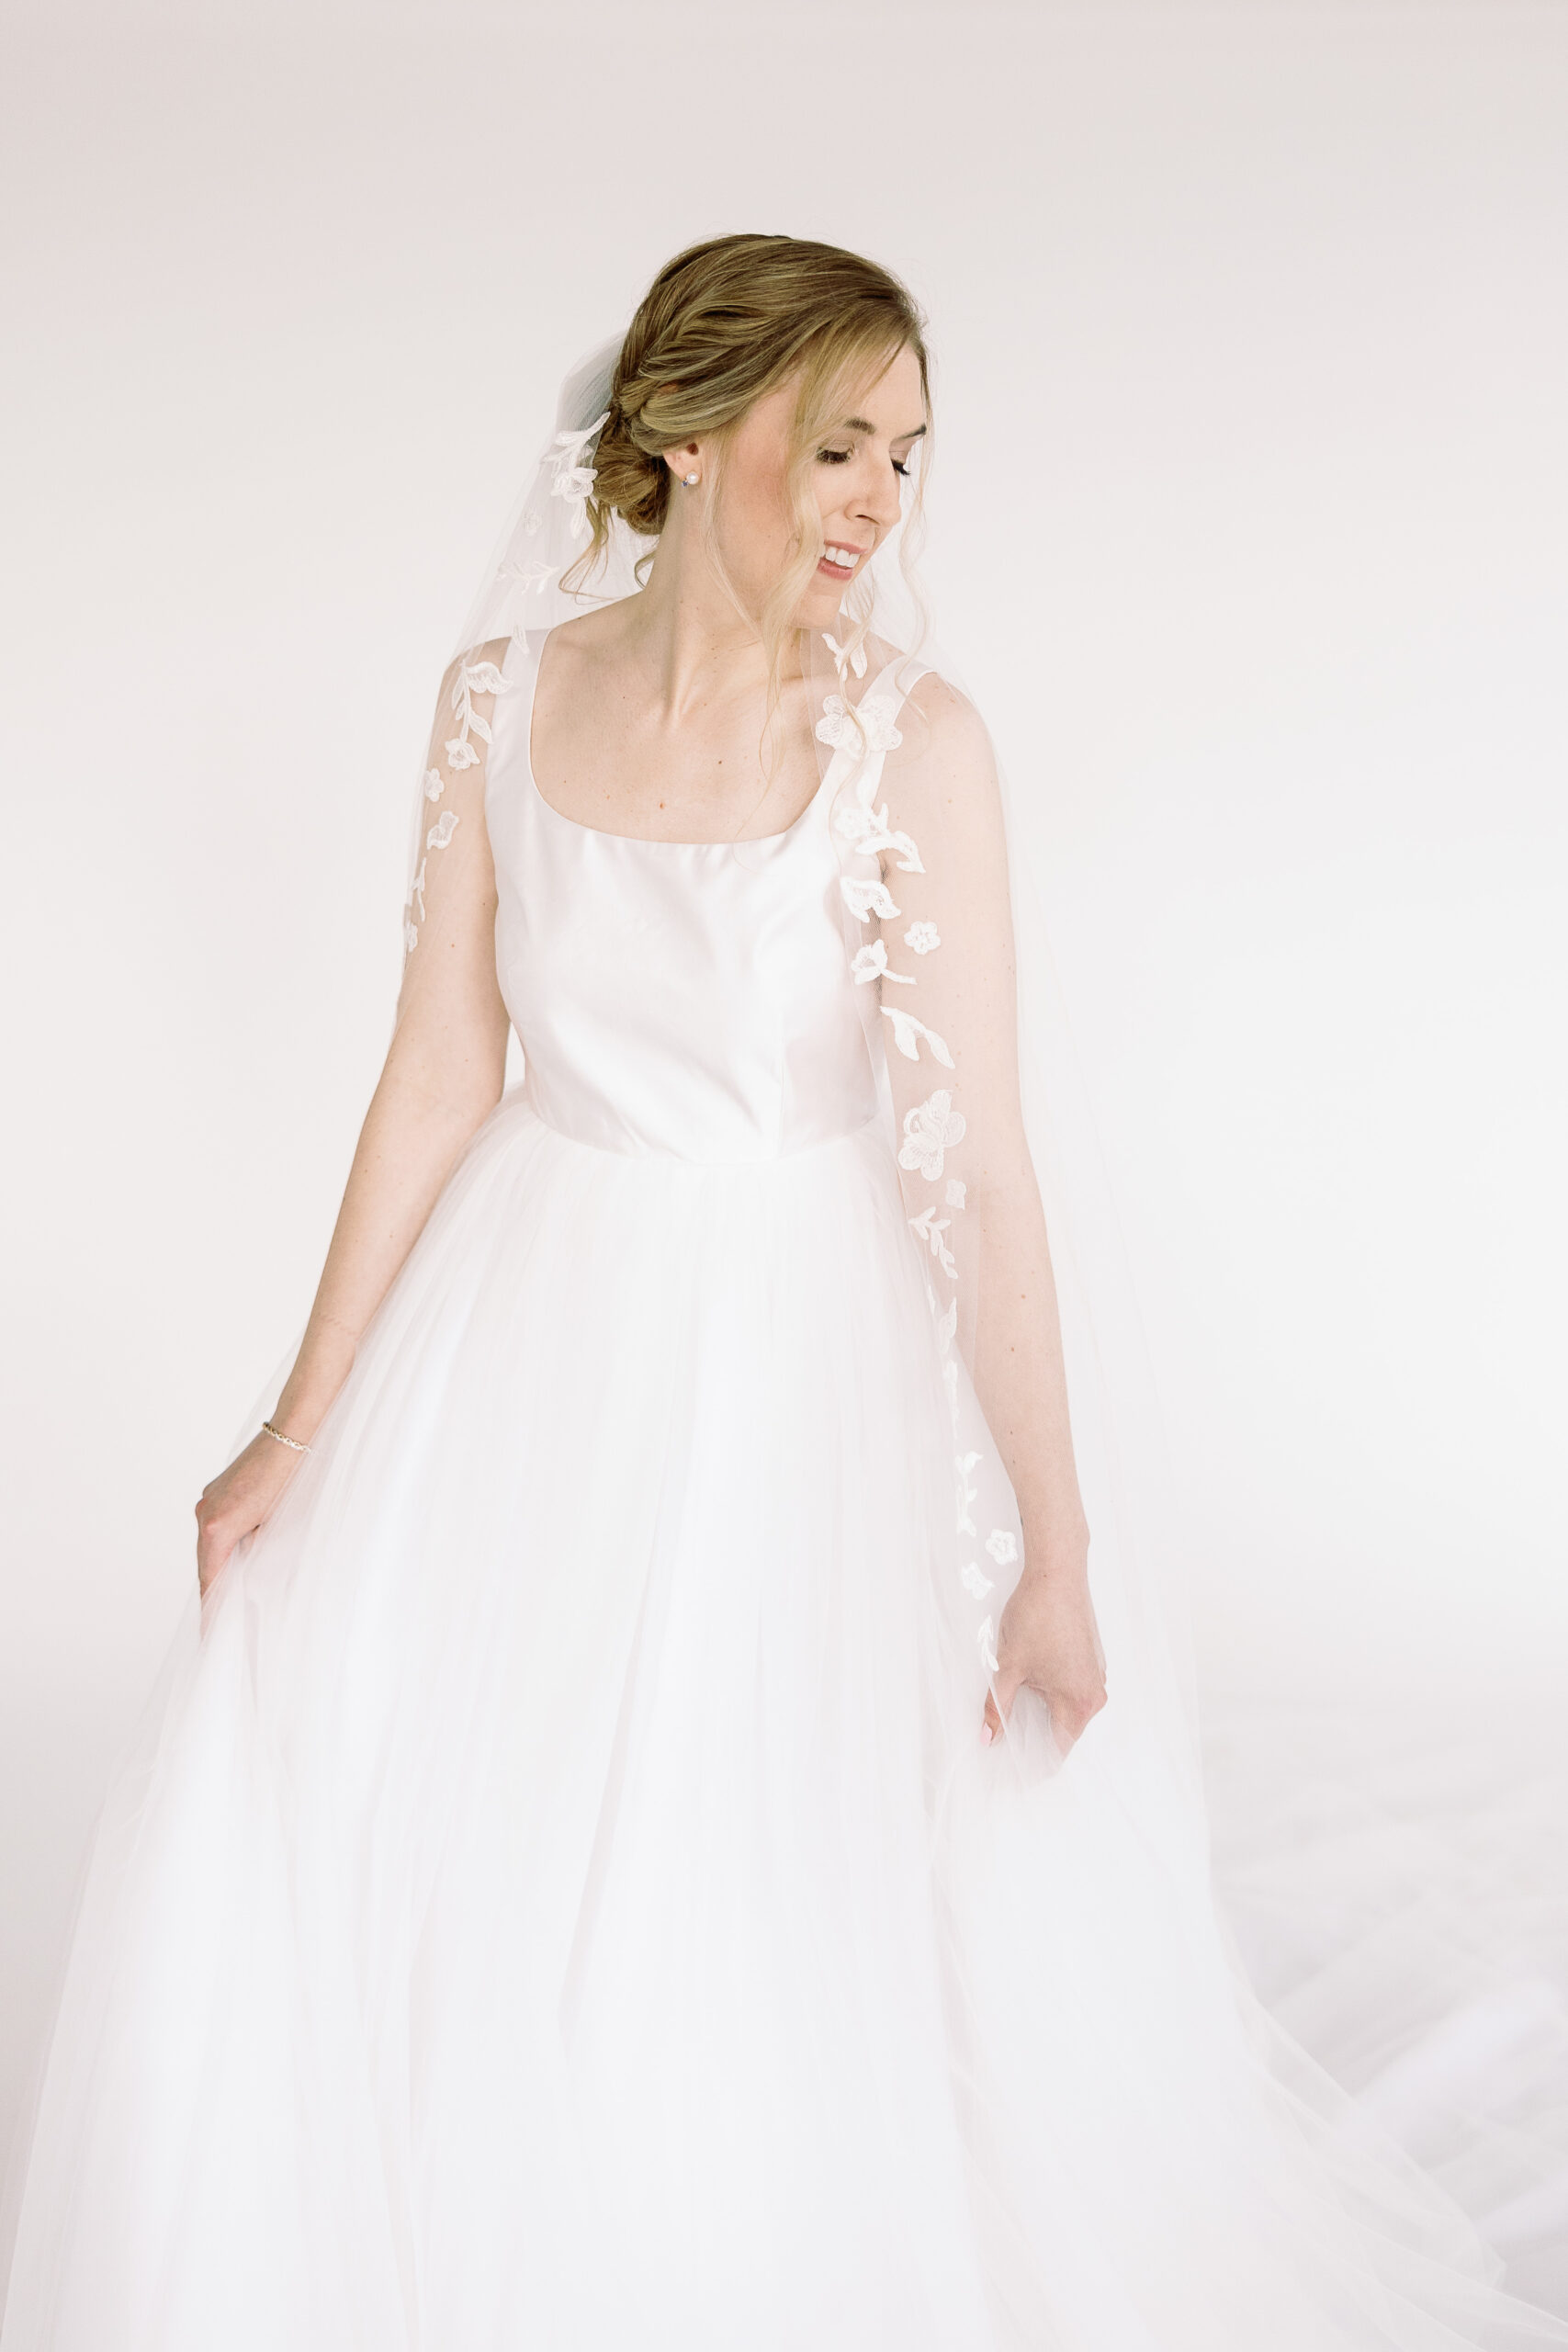 Couture Bride Ashley in Custom Sarah Kolis Gown and veil